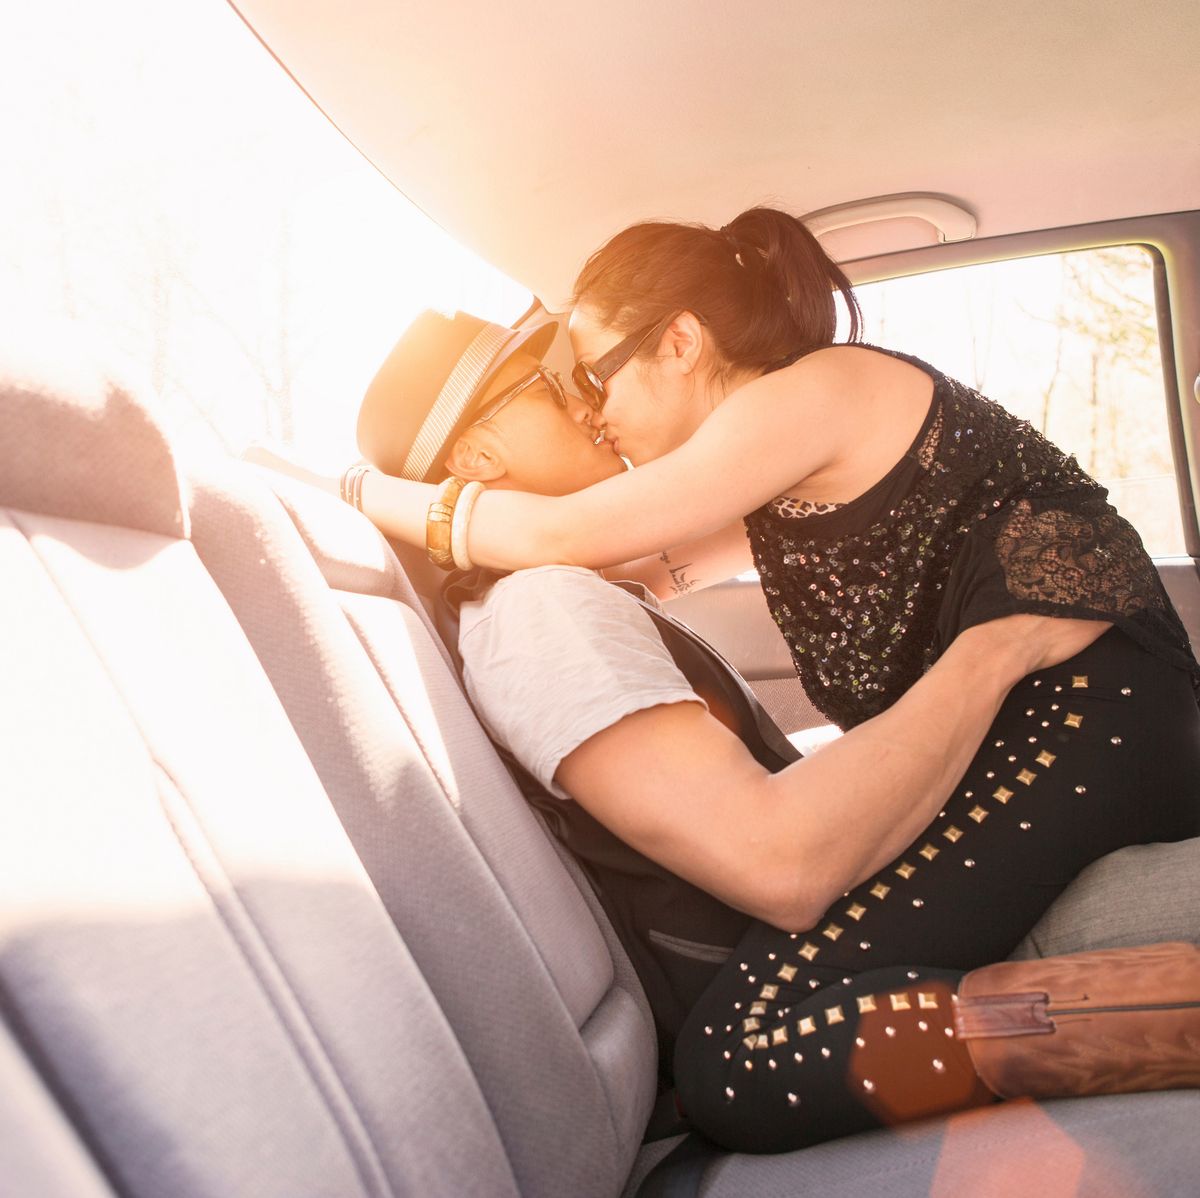 The 10 Best Car Sex Positions - How to Have Sex in a Car